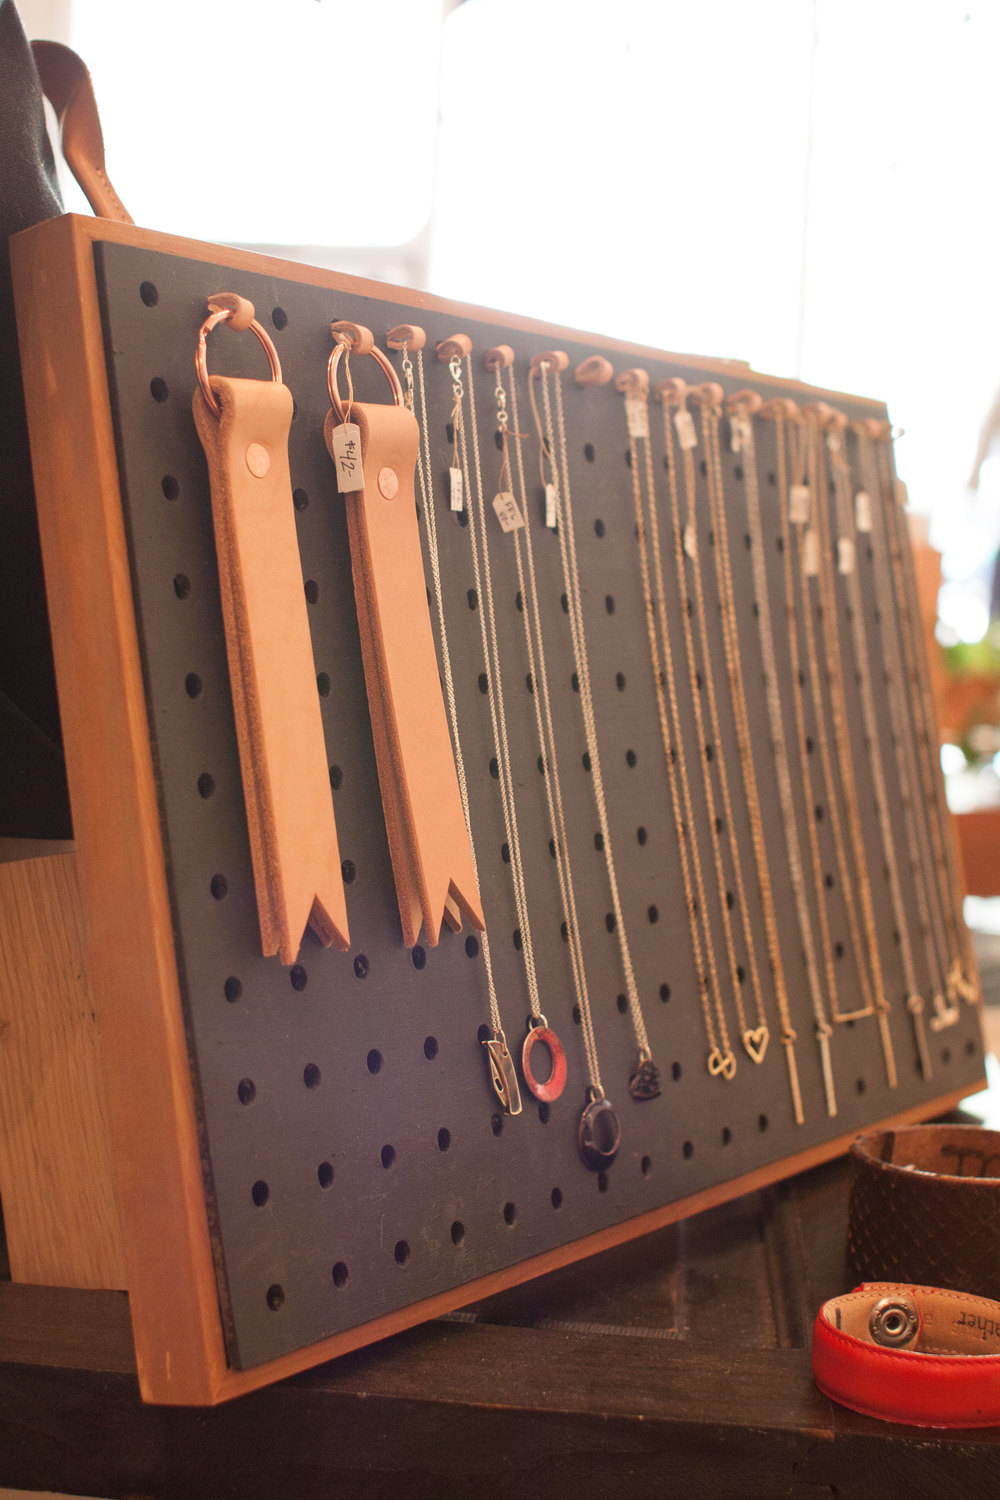  Various handmade pieces of jewelry are organized by small leather straps Chika made to attach to pegboard. It's the little things.  